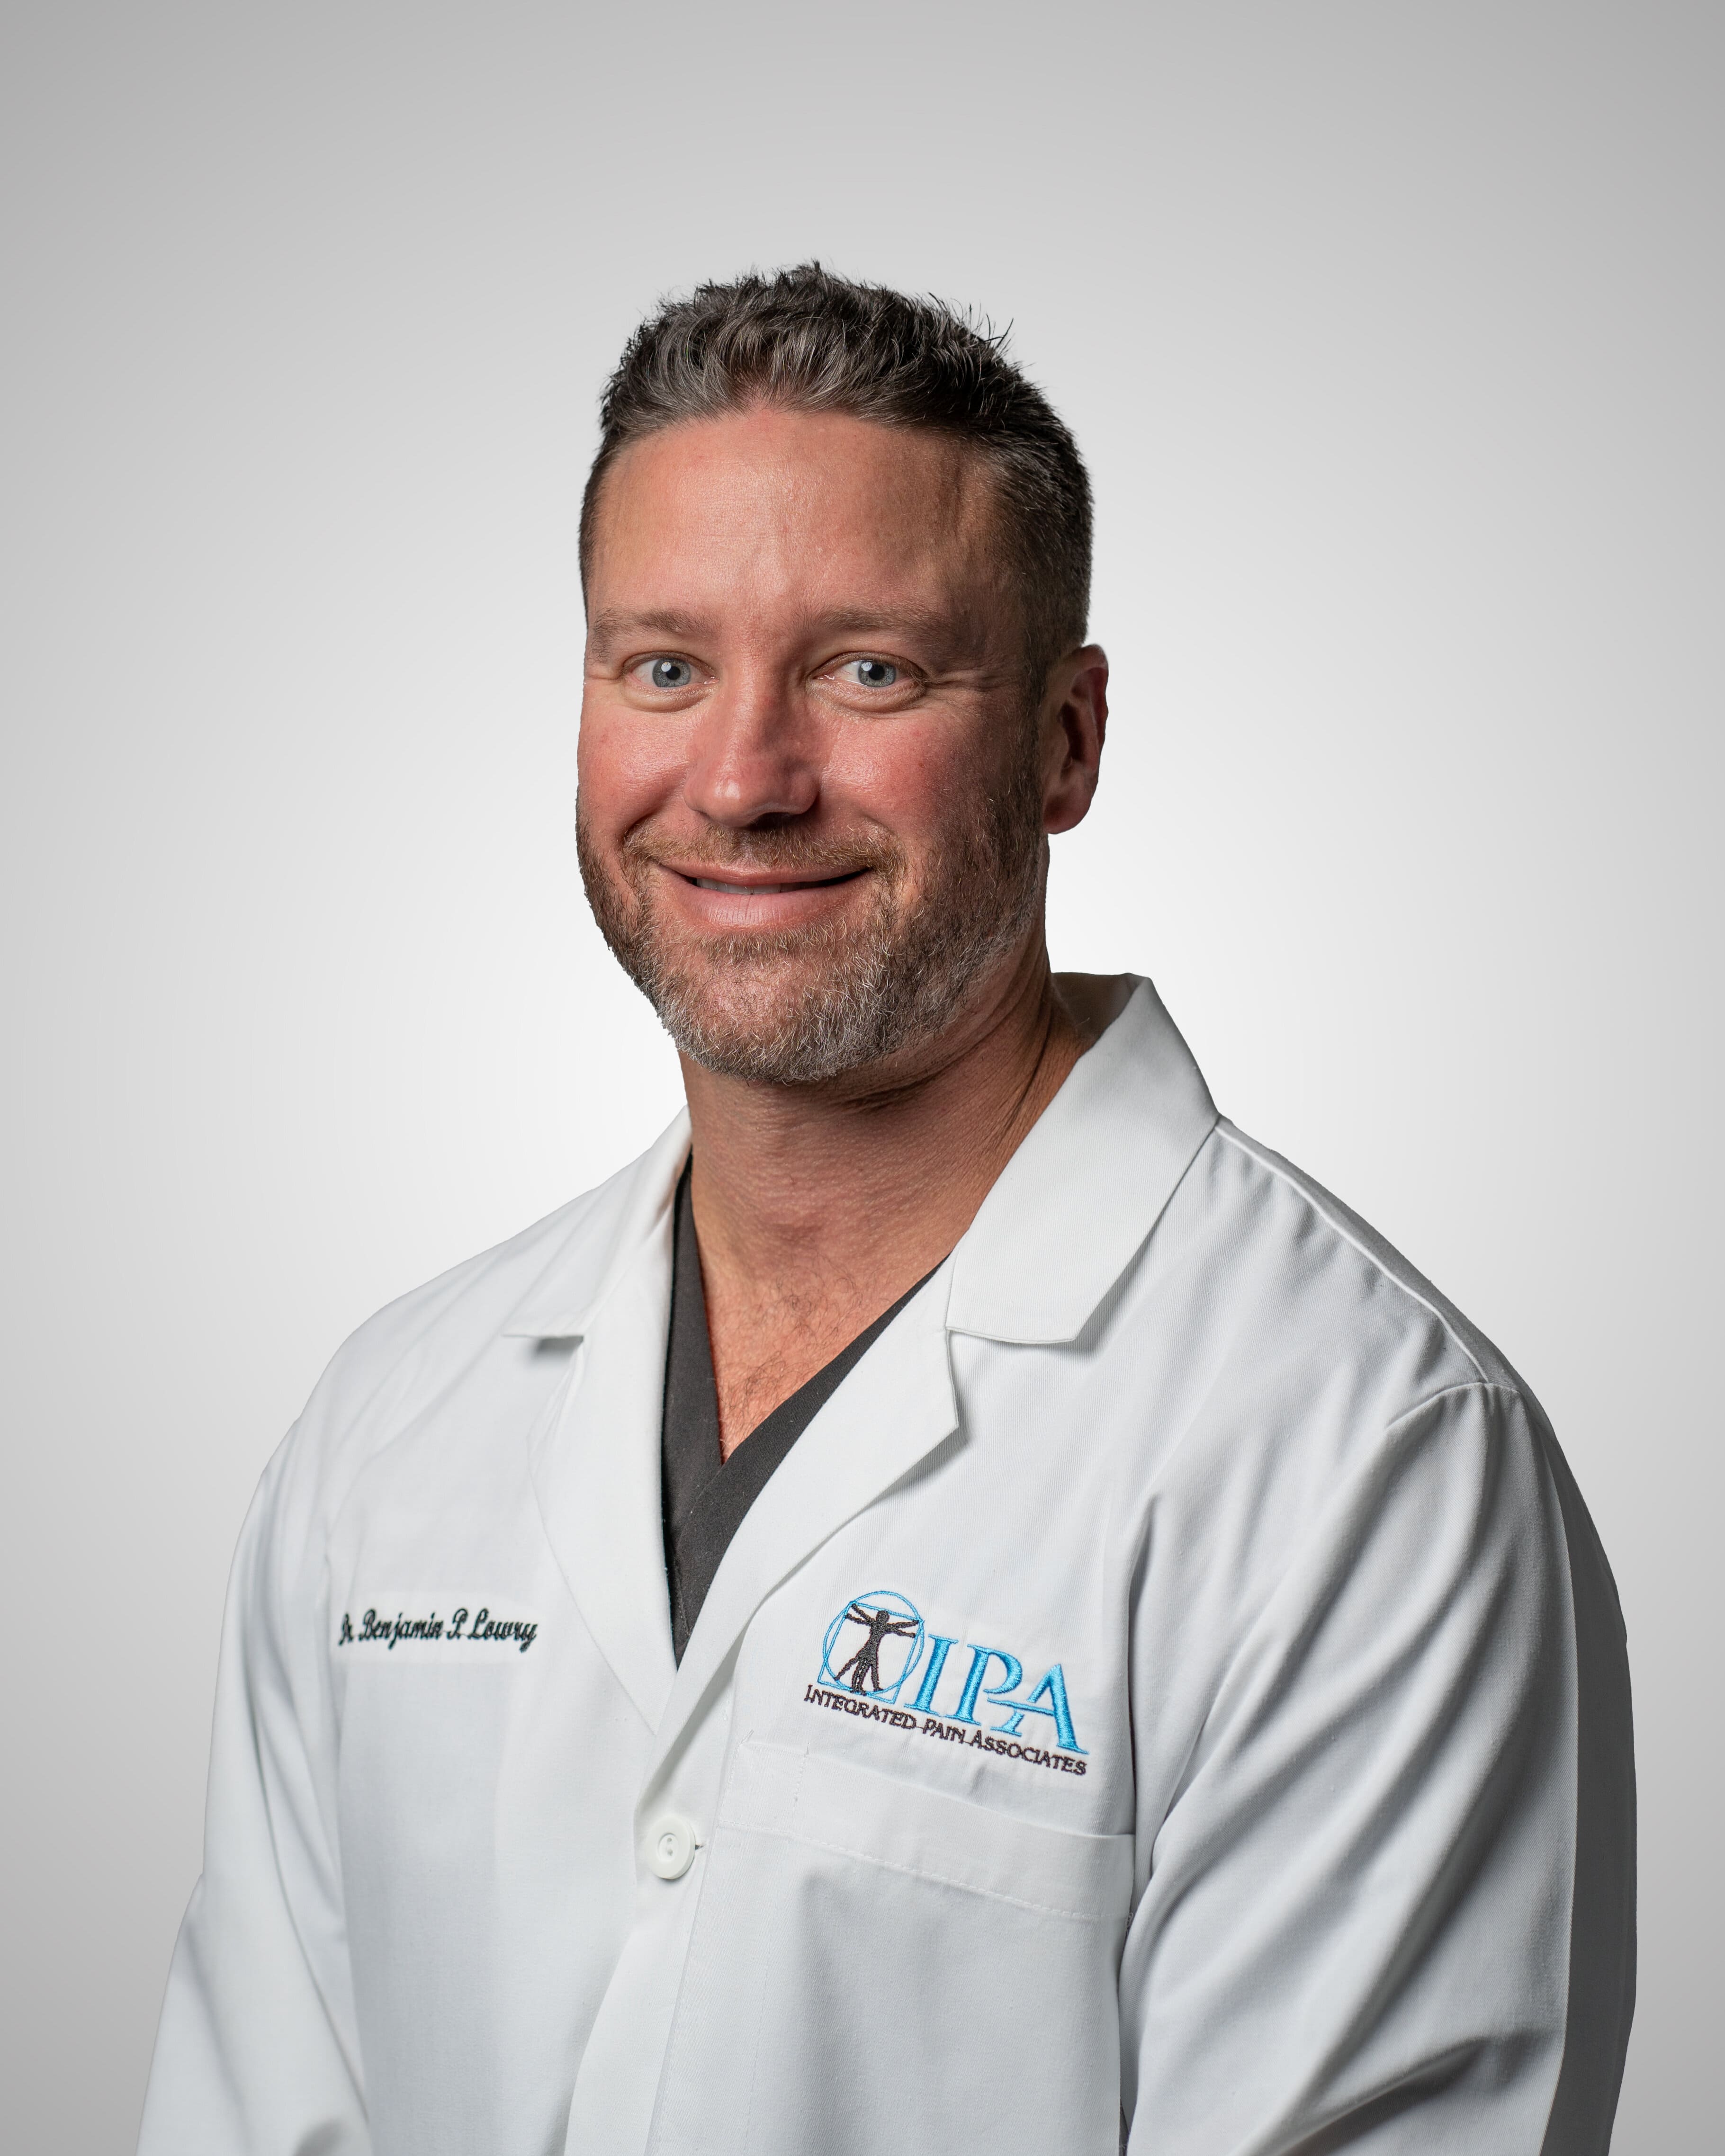 Dr. Benjamin Lowry
Board-Certified in Anesthesiology & Interventional Pain Management